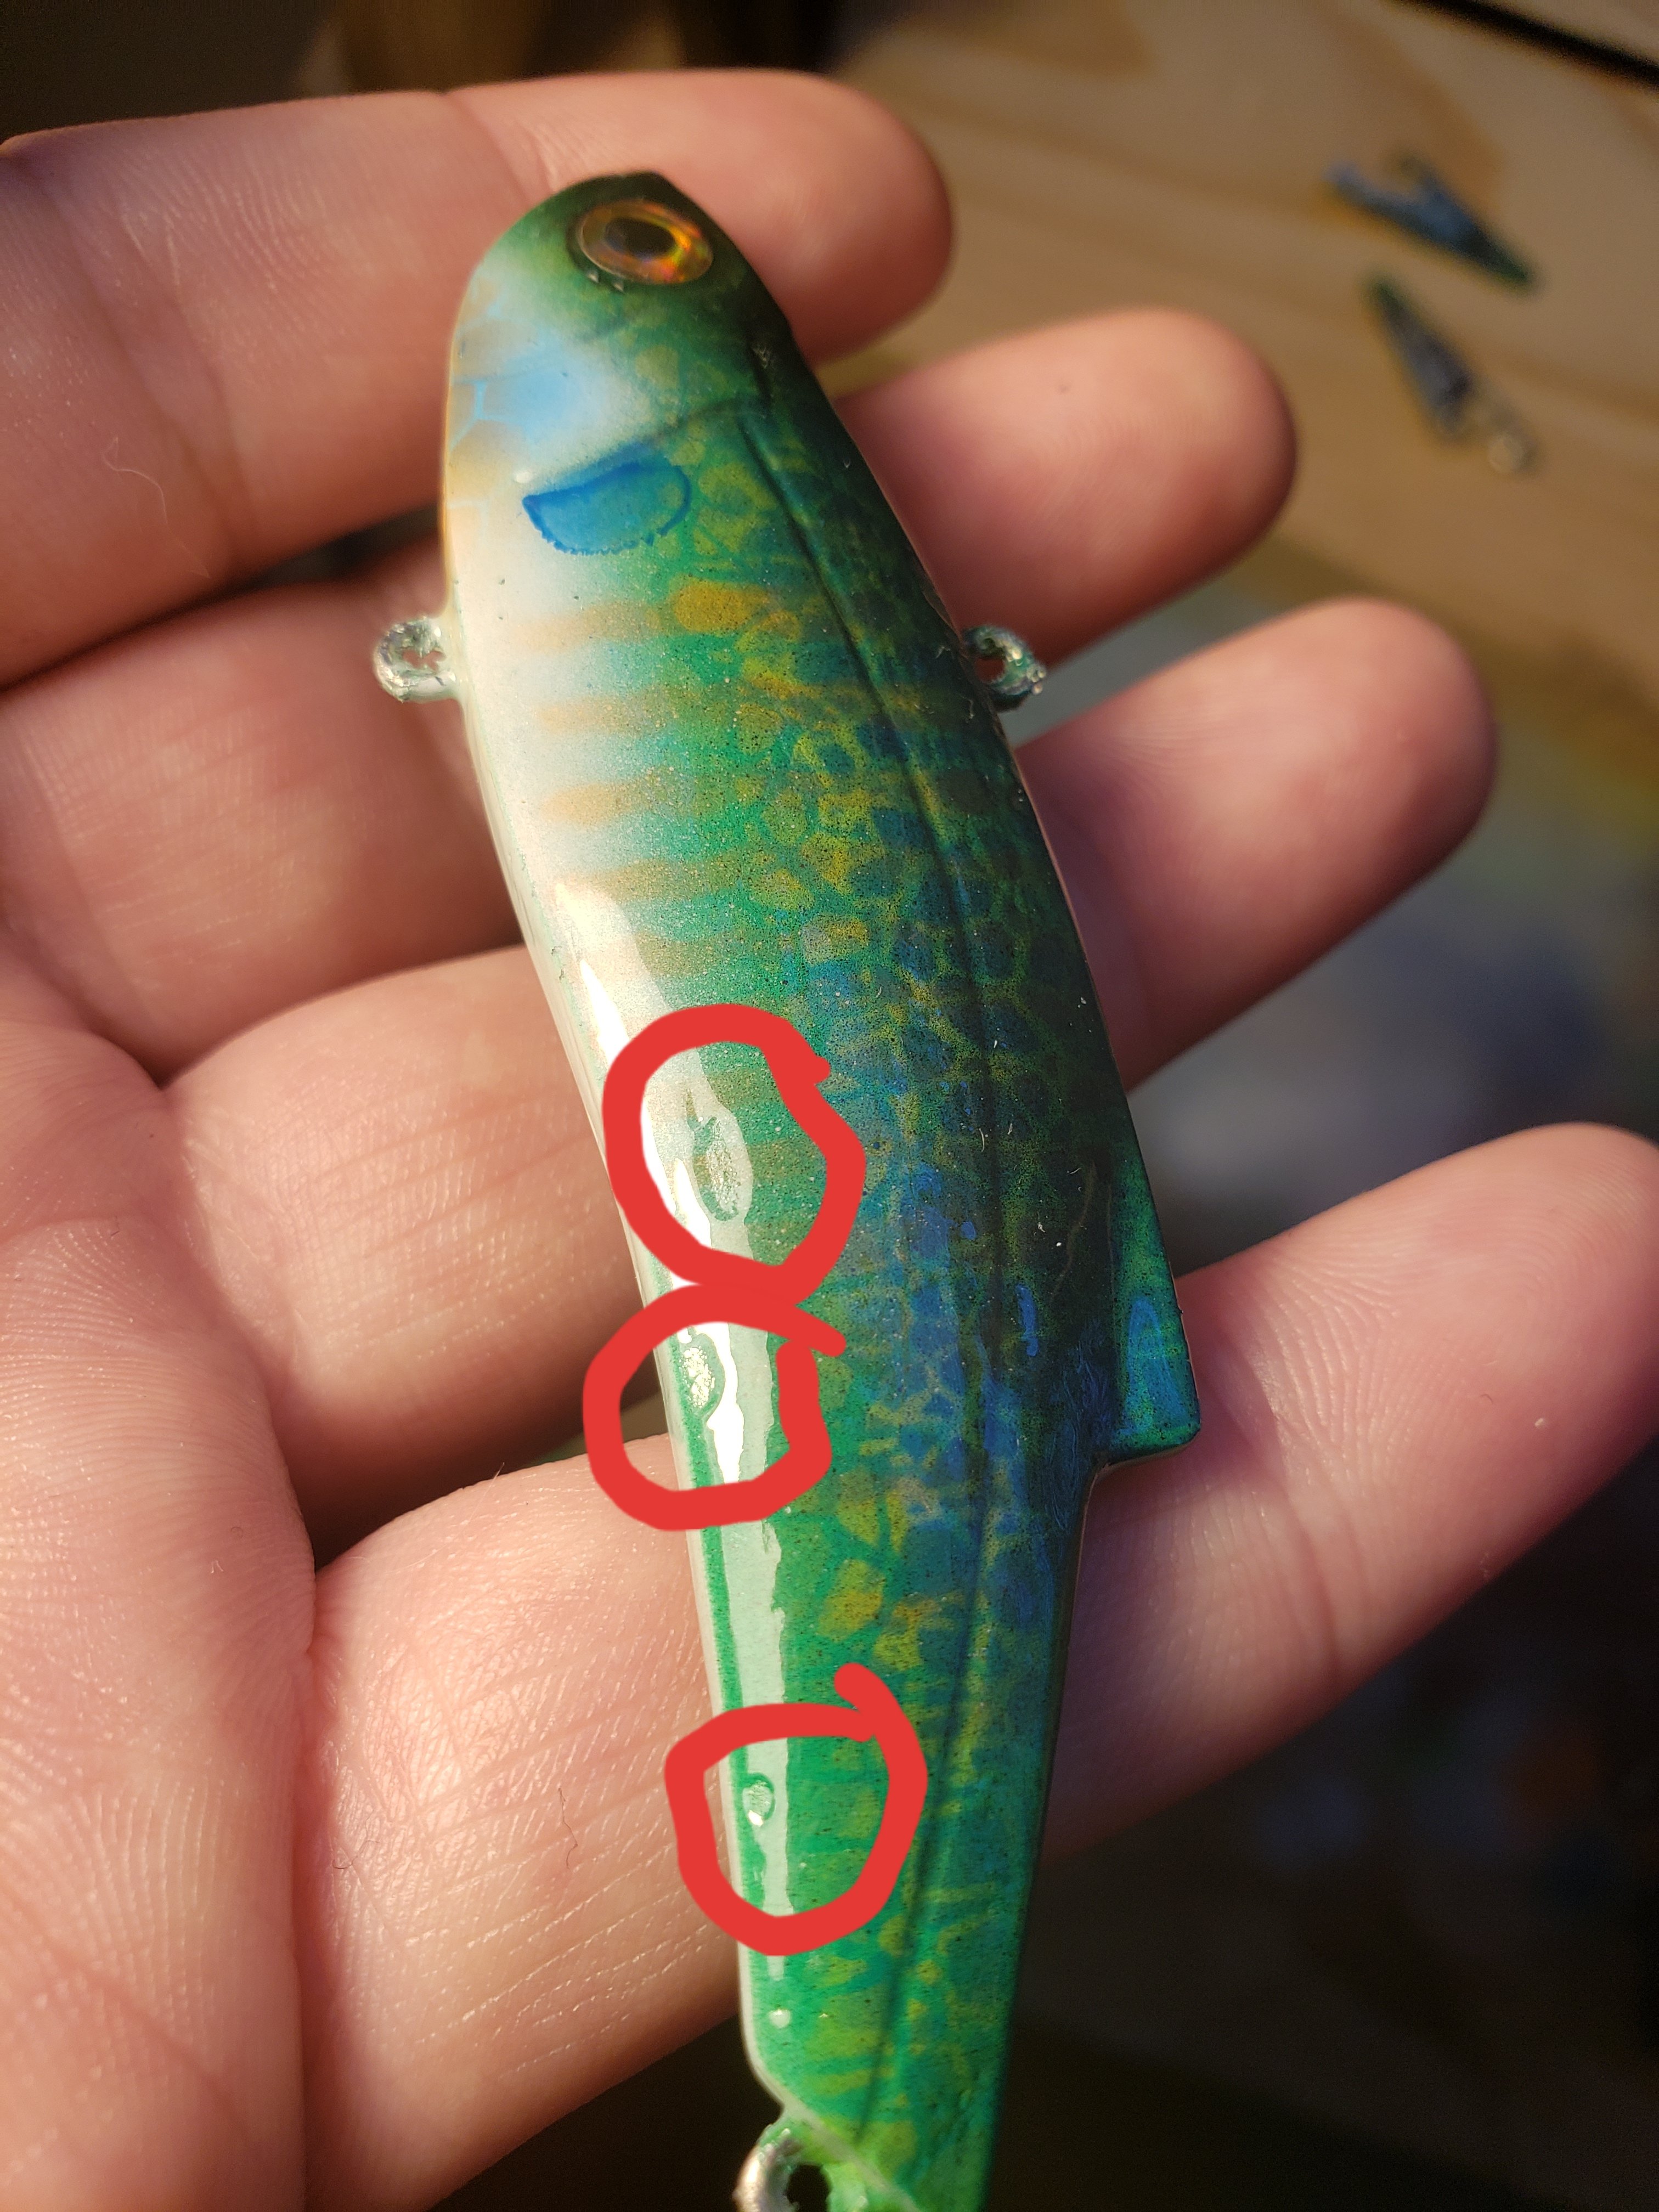 Lure Makers Need A Quality Clear Coat - Customer Photos, Videos